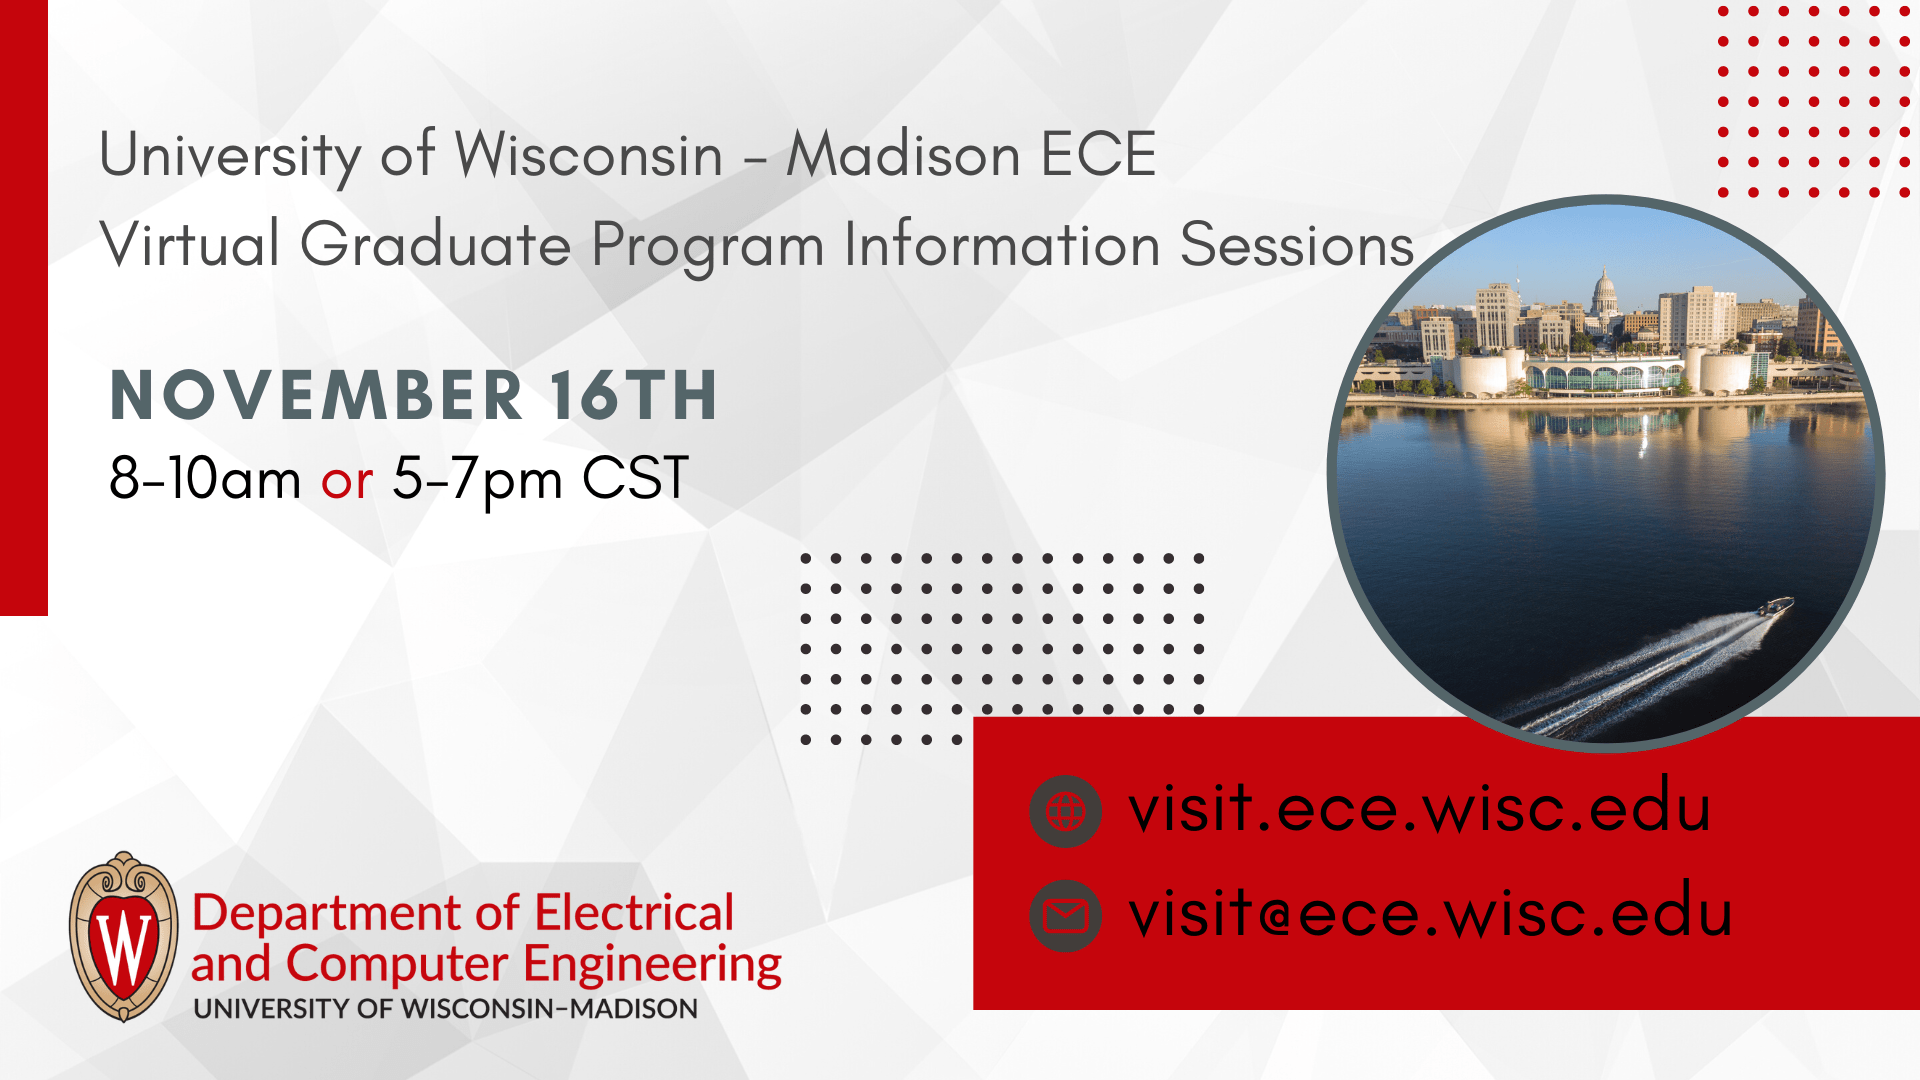 University of Wisconsin - Madison ECE Virtual Graduate Program Information Sessions, November 16th, 8-10am or 5-7pm CST, Department of Electrical and Computer Engineering, visit.ece.wisc.edu, visit@ece.wisc.edu